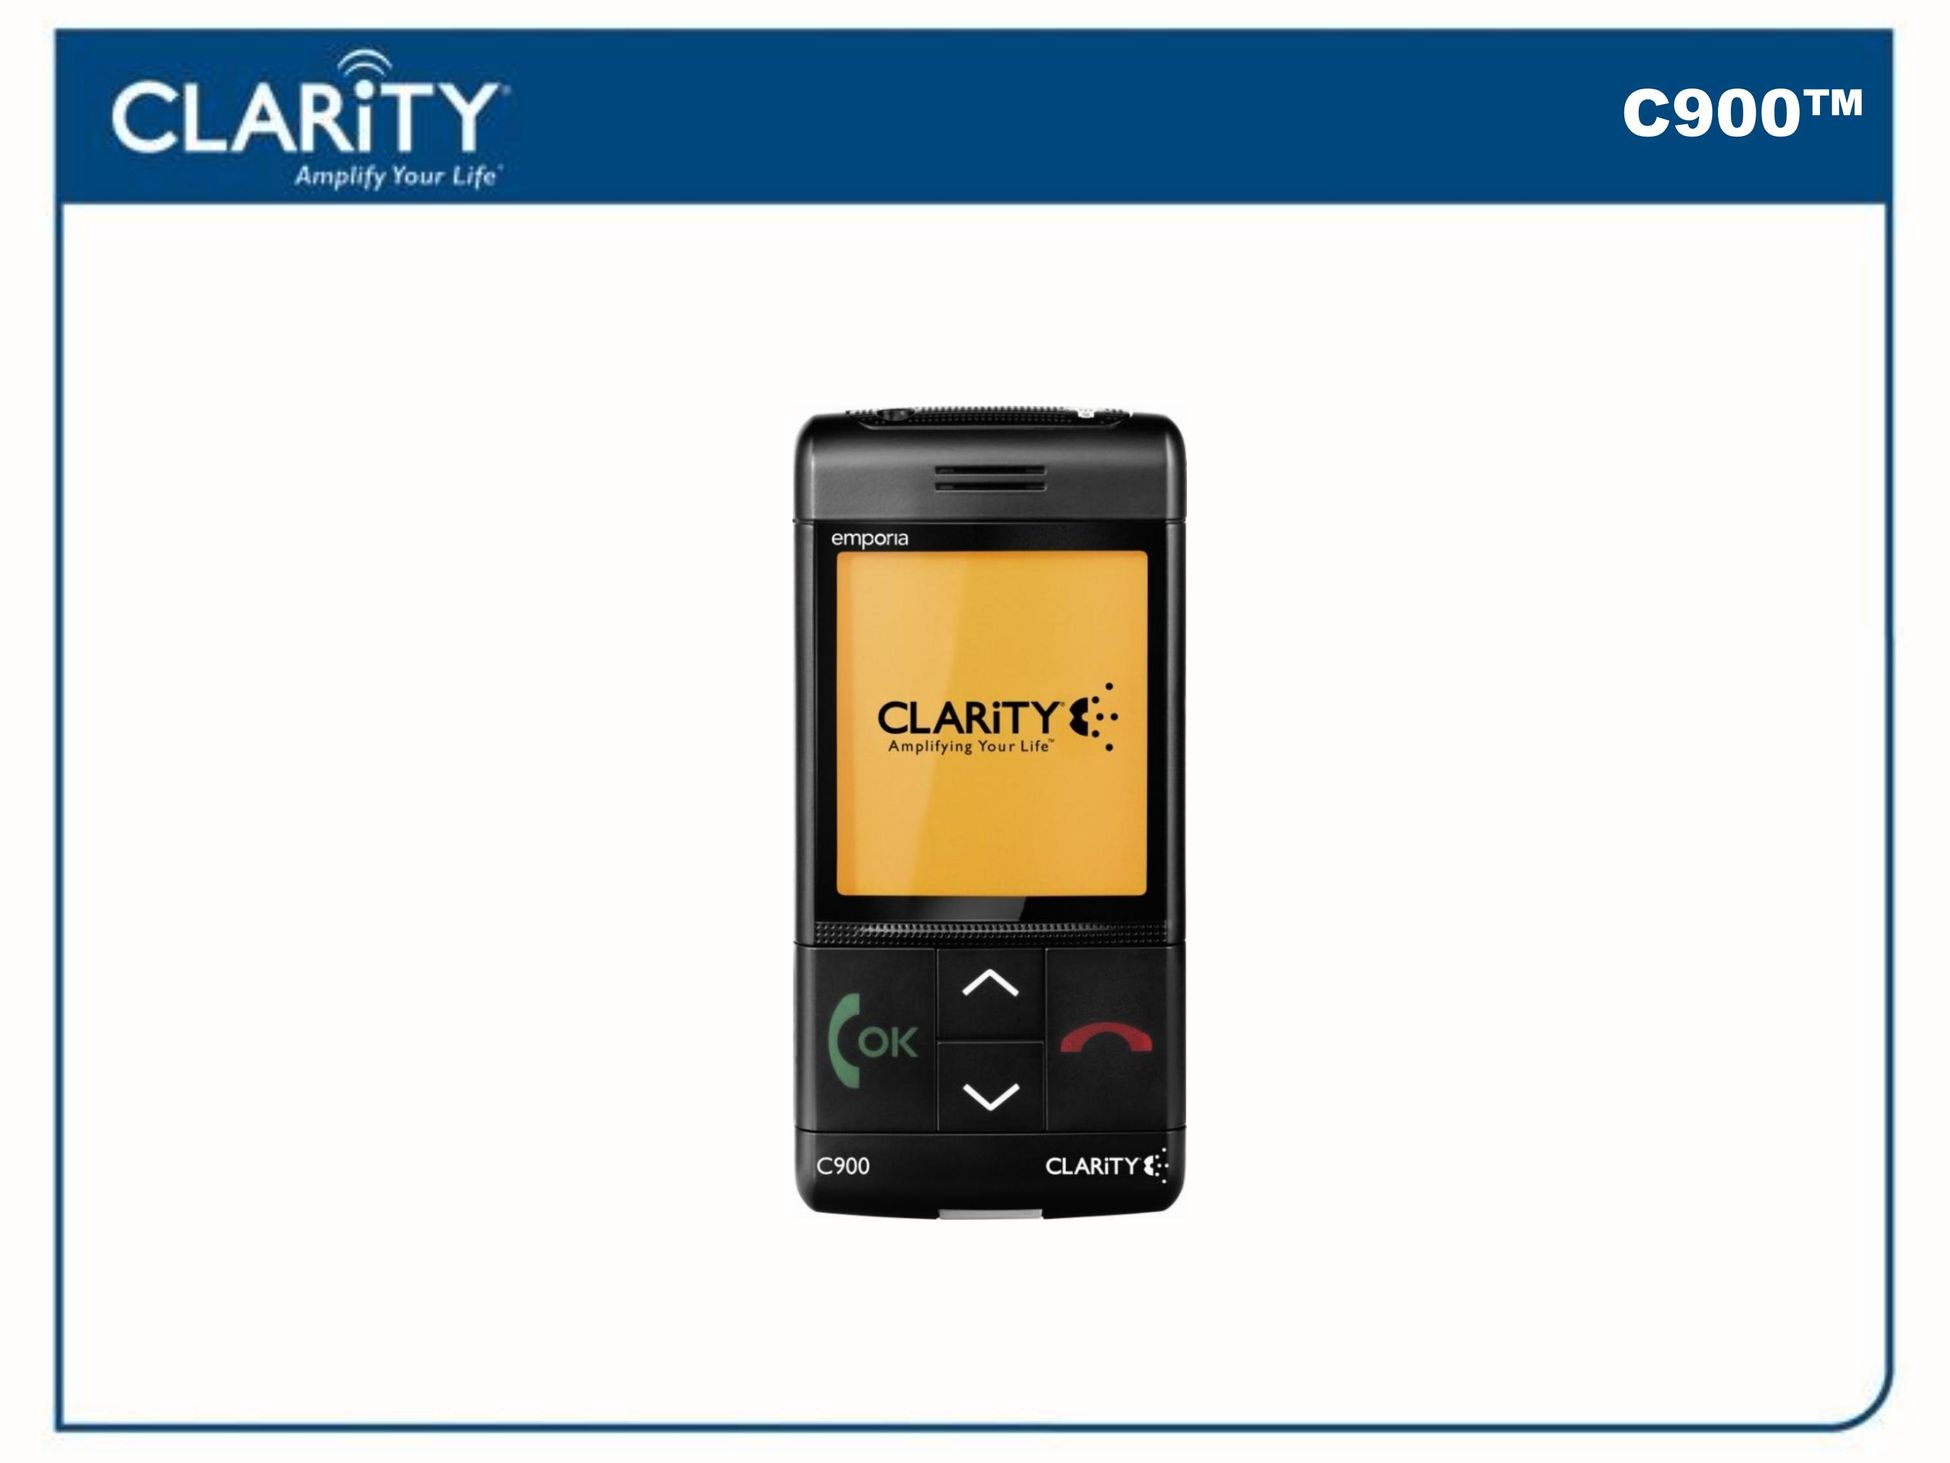 Clarity C900 Cell Phone User Manual